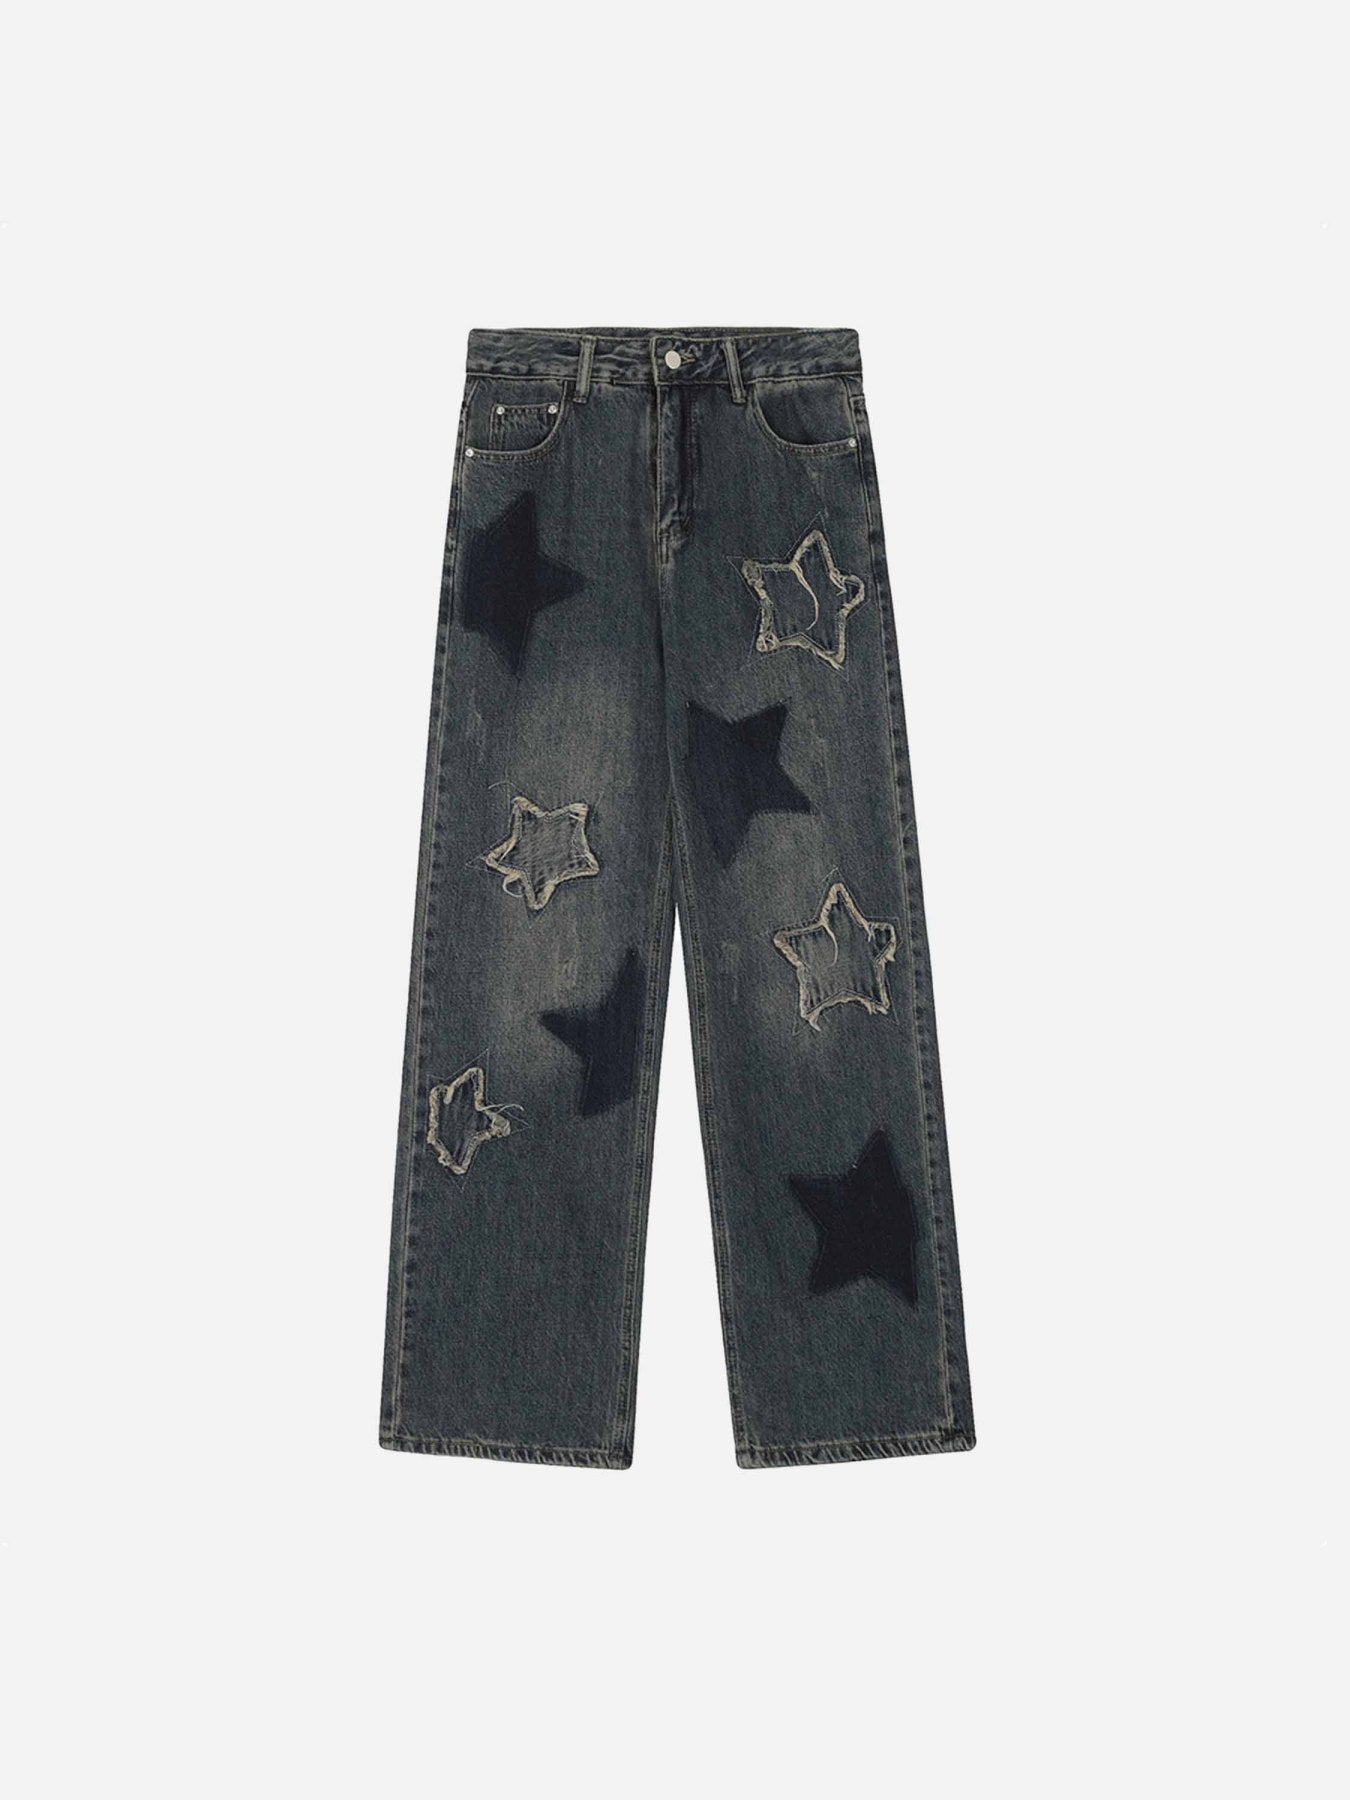 The Supermade Airbrushed Pentagram Applique Jeans - 1656